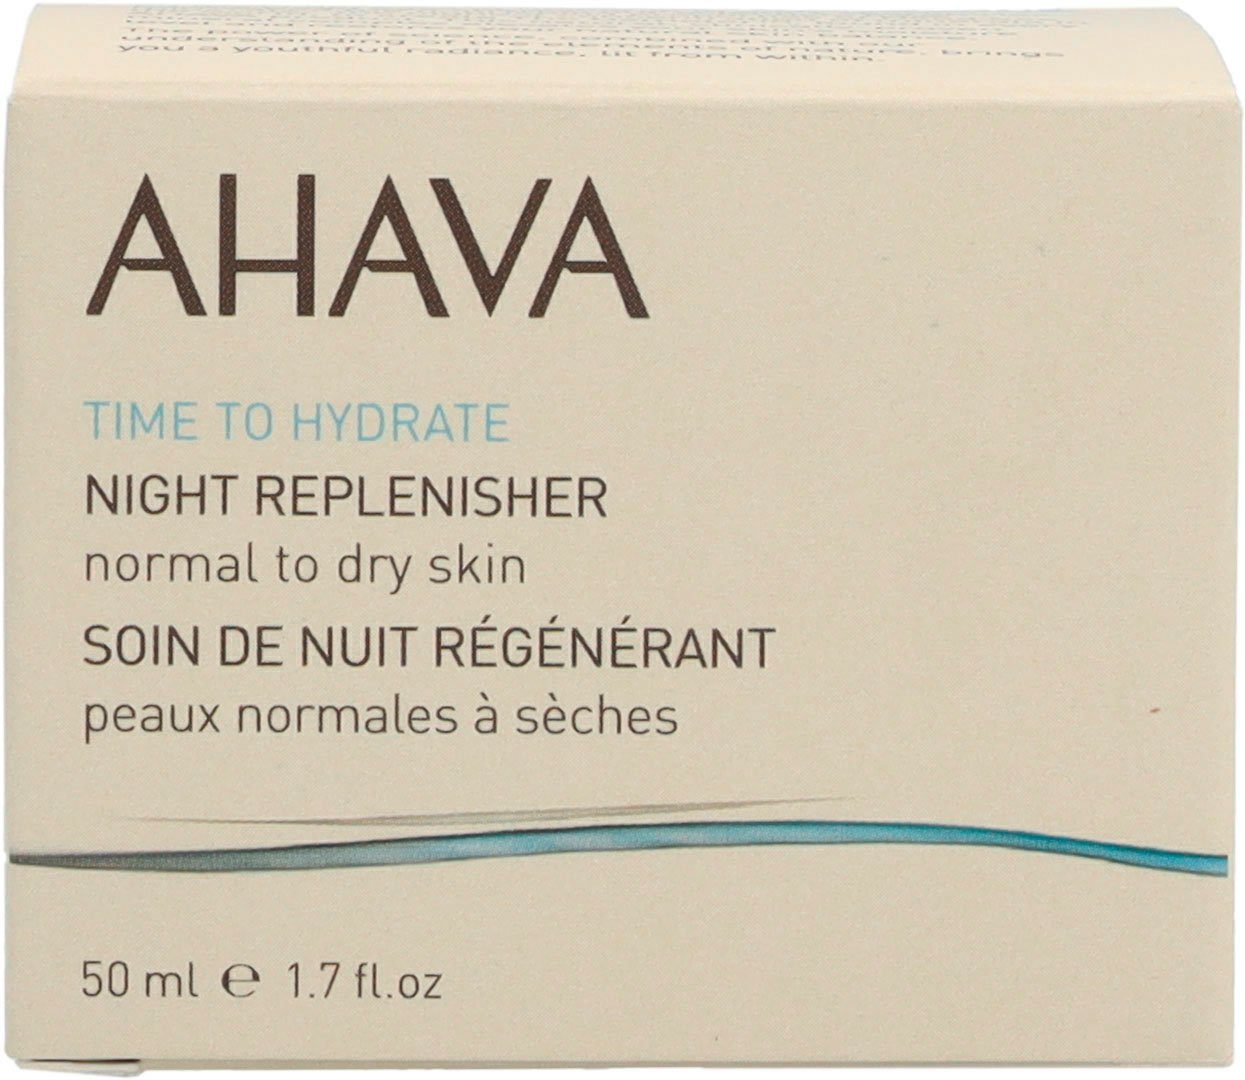 Nachtcreme Night Hydrate Time Normal To AHAVA Dry Replenisher